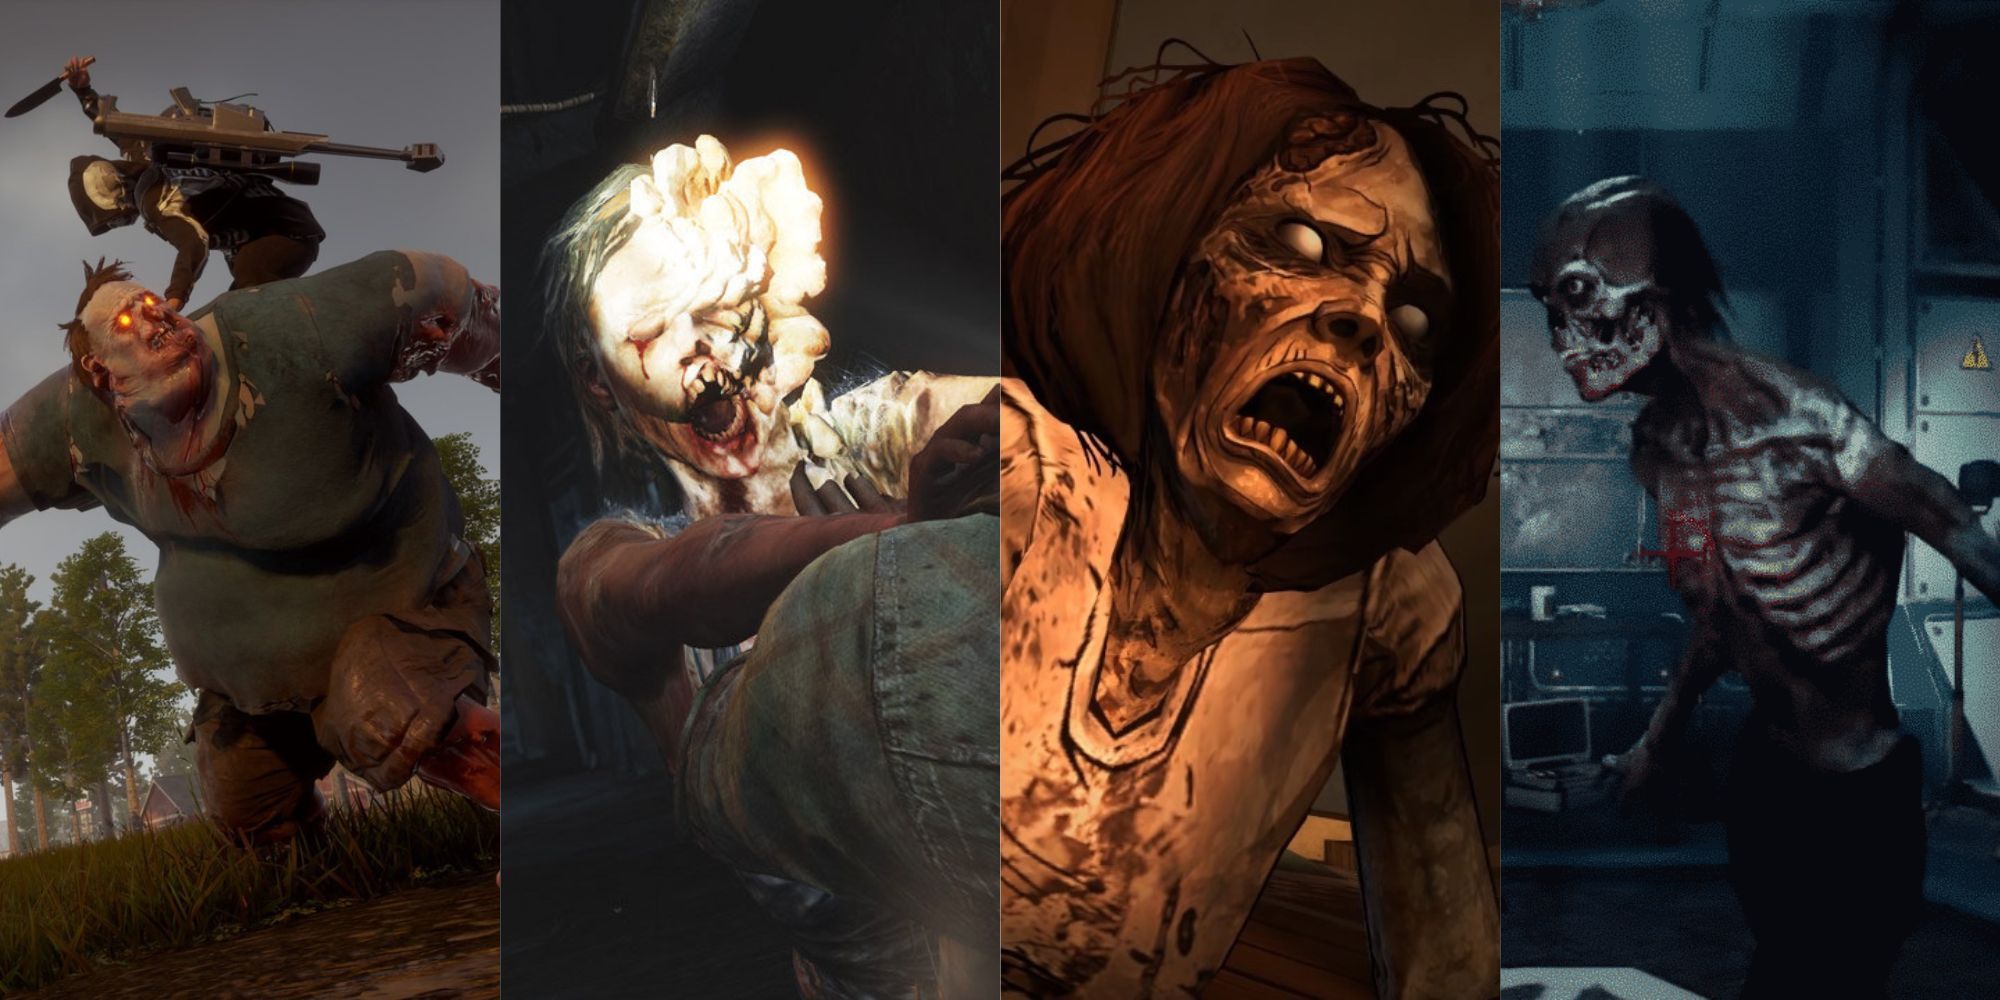 Zombies in State of Decay 2, The Last Of Us, Walking Dead, and The House of The Dead